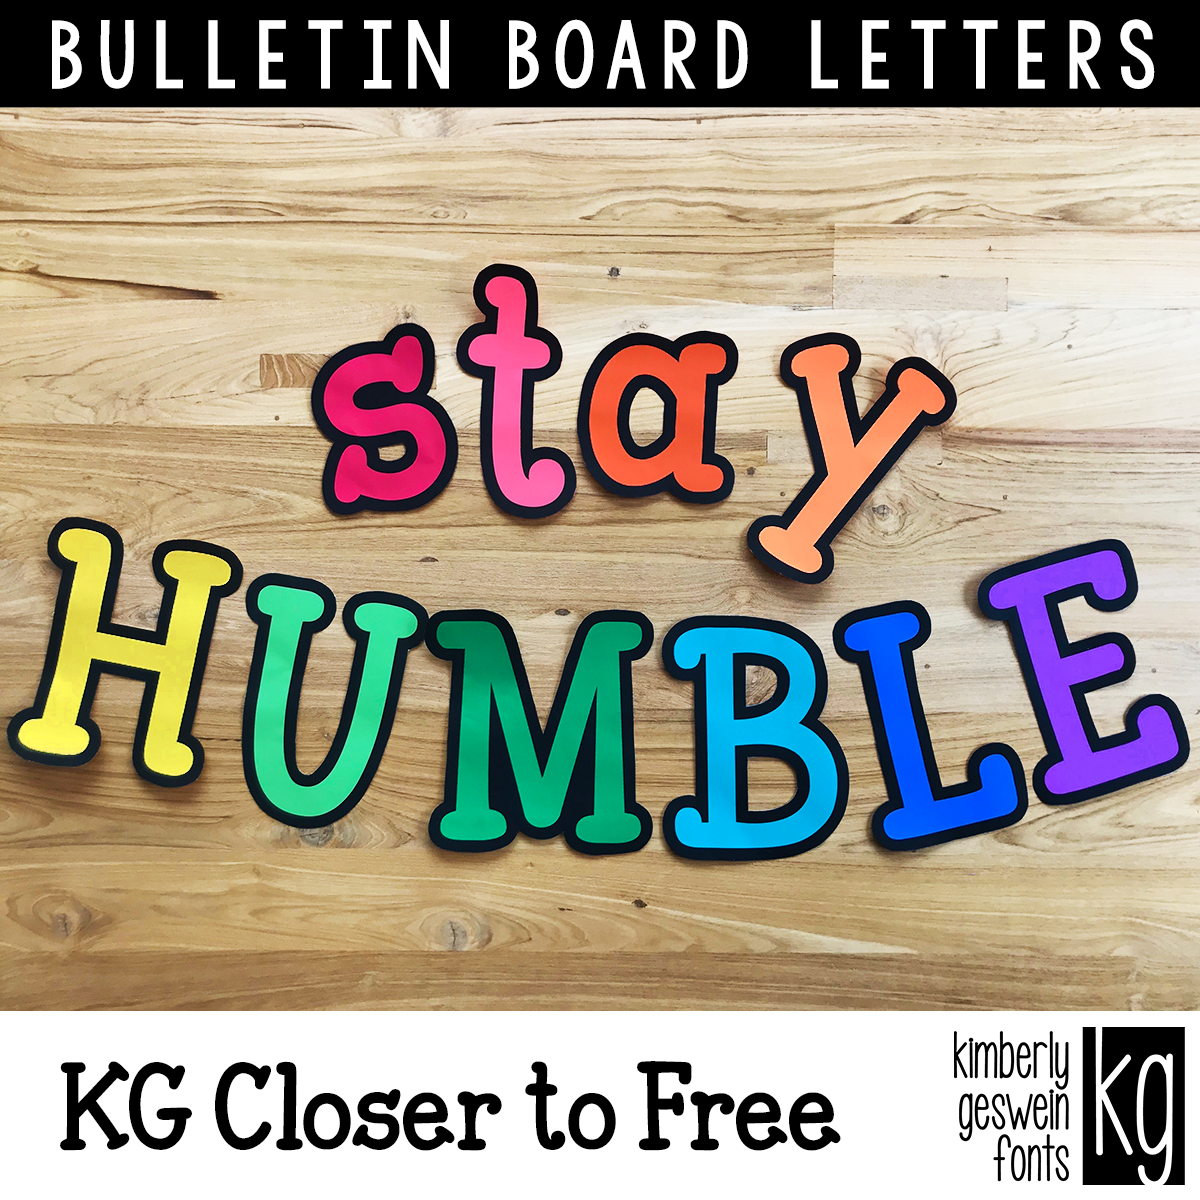 printable-letters-for-bulletin-board